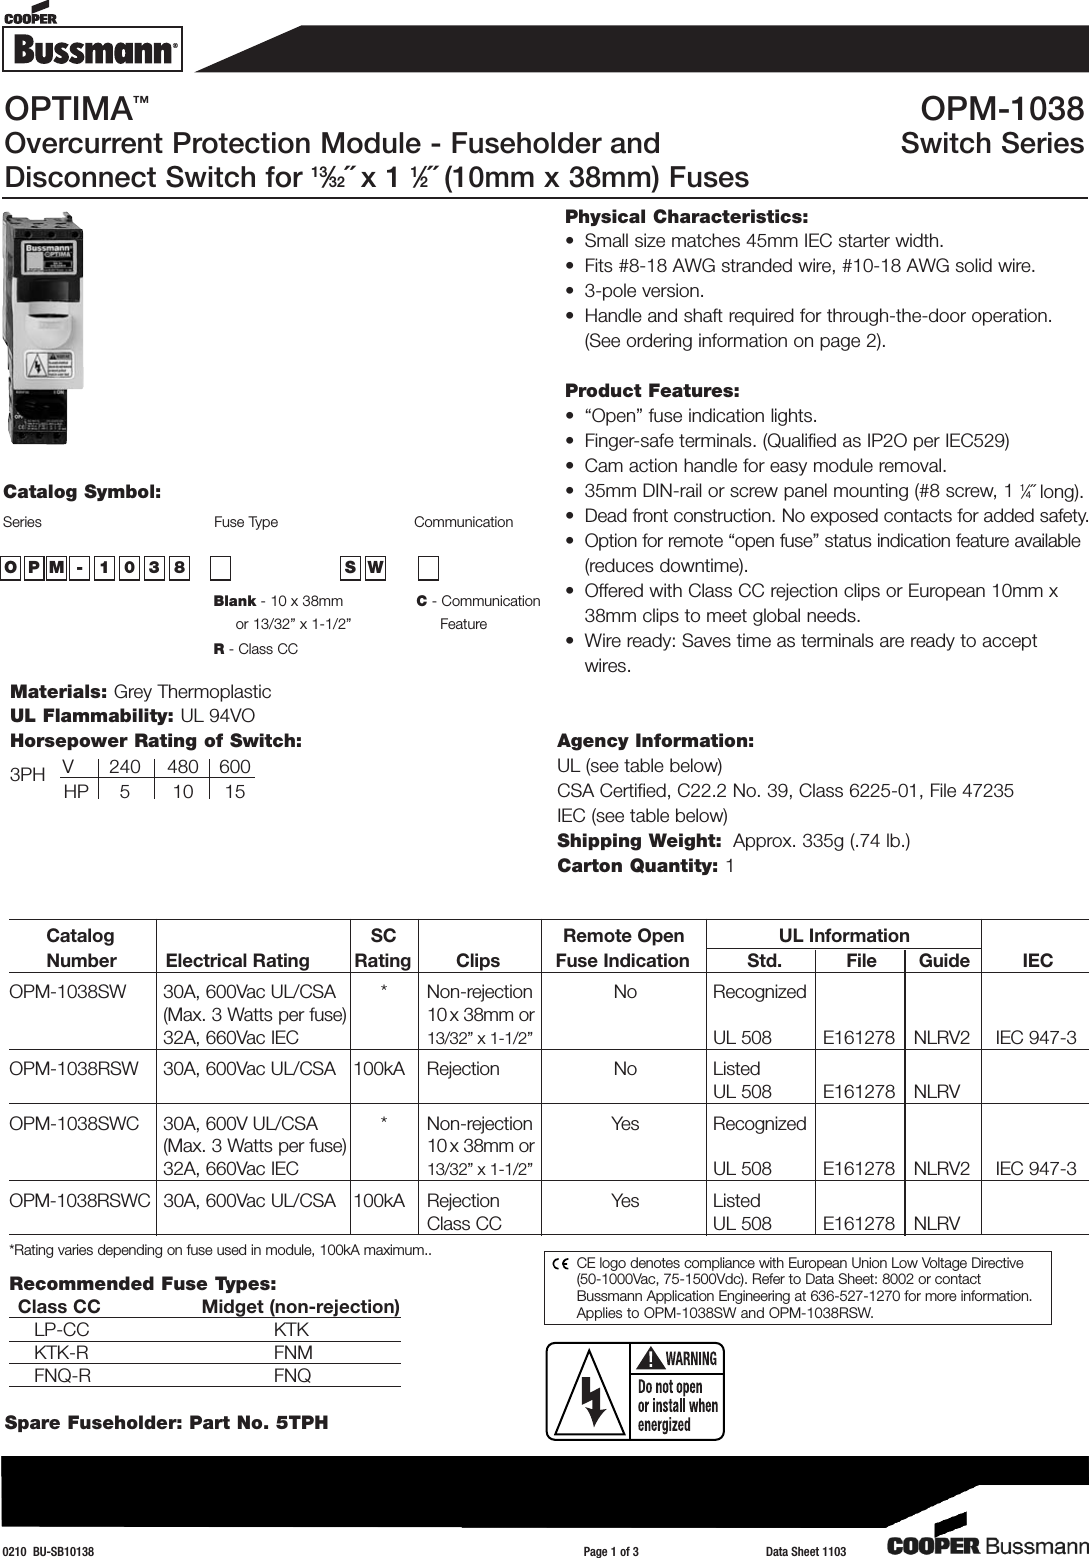 Page 1 of 3 - OPM-1038 S 2-8-10  Brochure